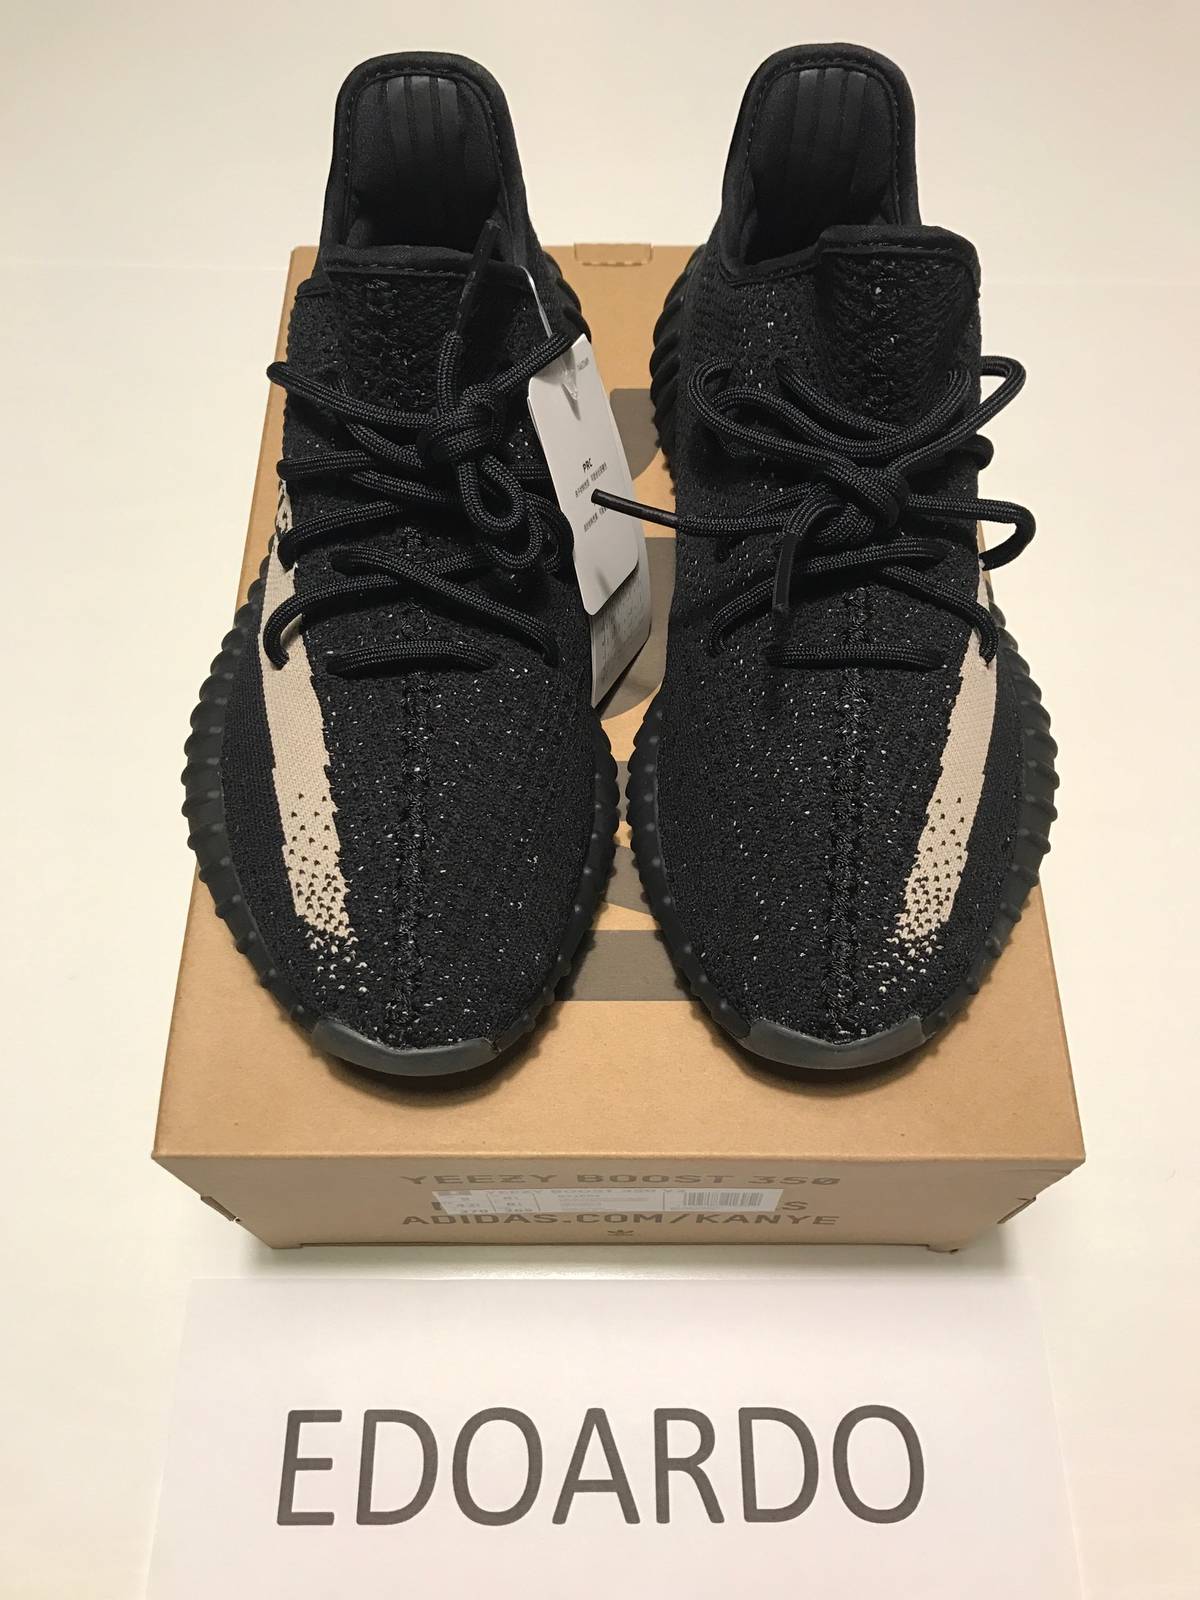 Adidas Yeezy Boost 350 V2 Black / White GIVEAWAY !!